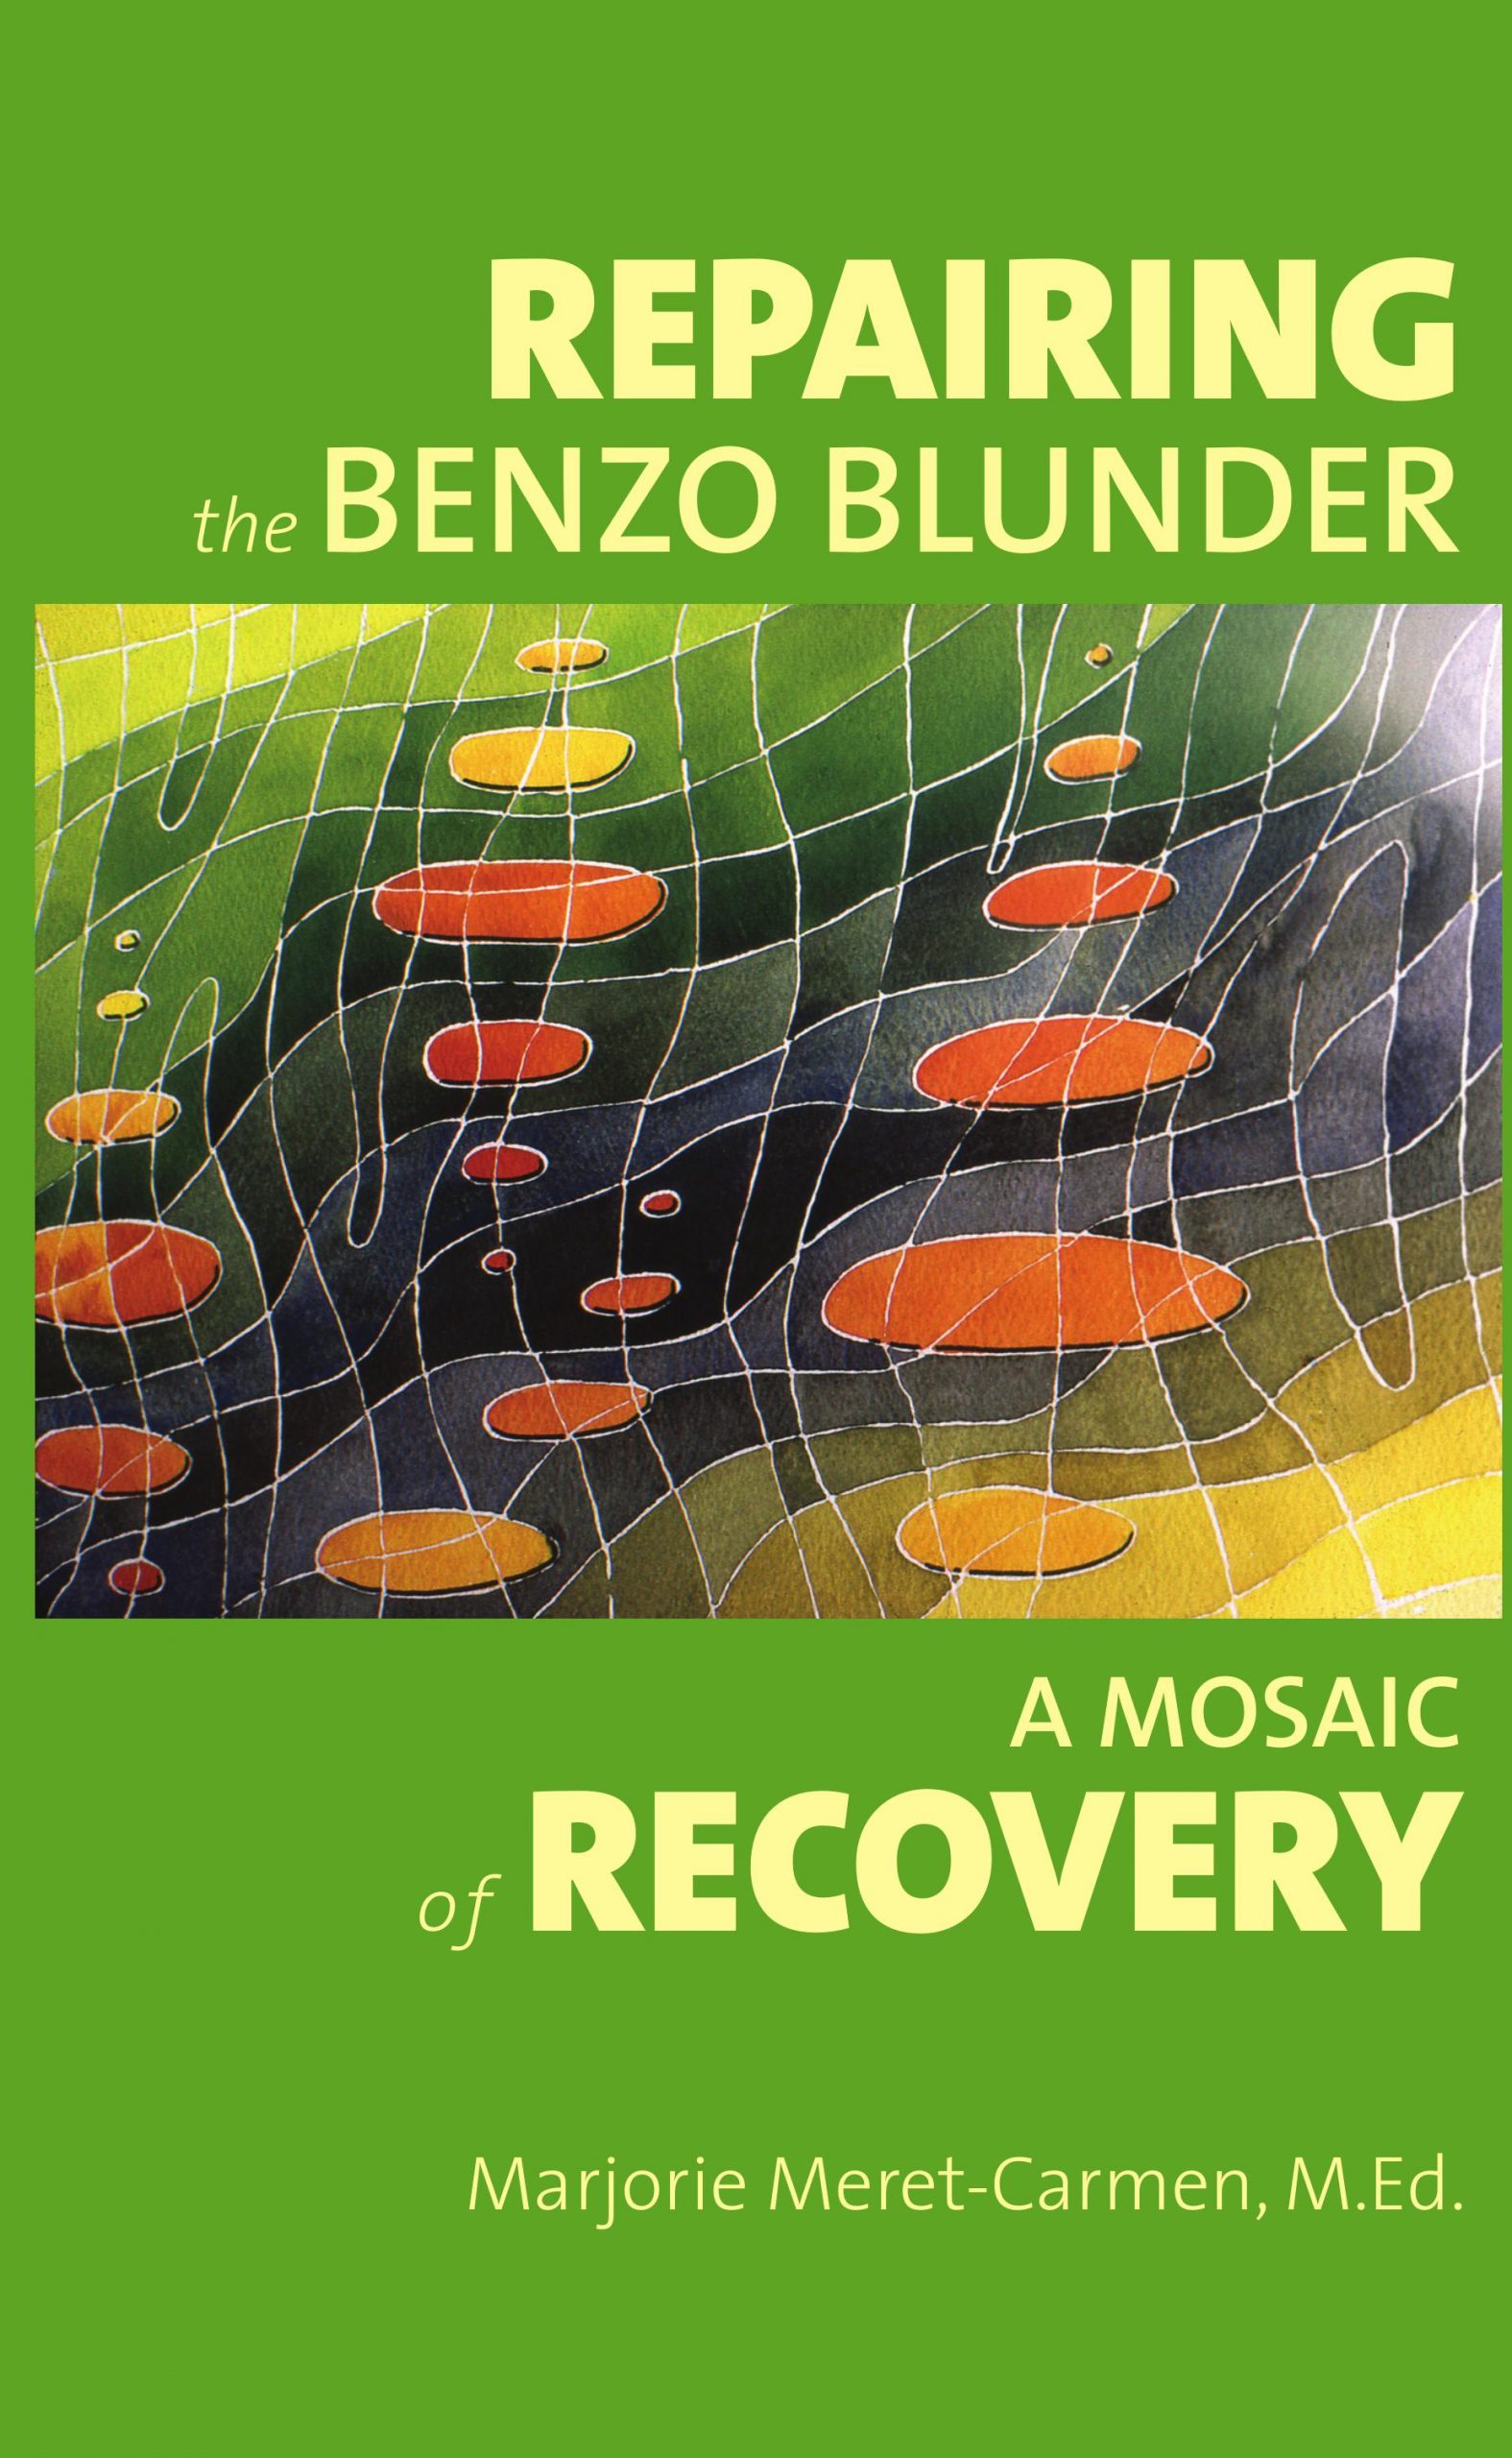 Repairing the Benzo Blunder:  A Mosaic of Recovery by Marjorie Meret-Carmen, M.Ed.